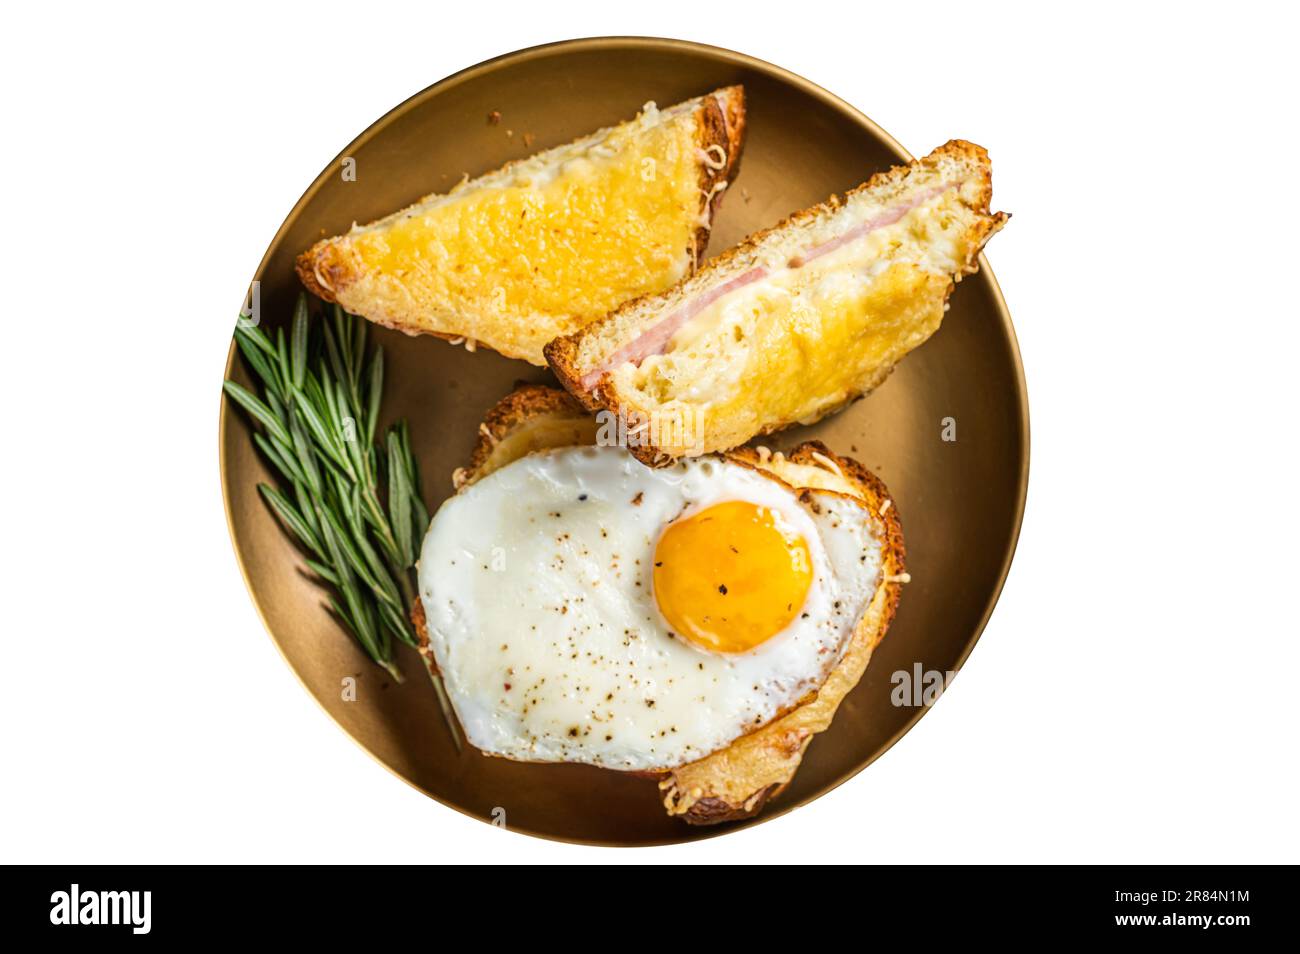 Croque monsieur and croque madame sandwiches with sliced ham, melted emmental cheese and egg, French toasts. Isolated on white background Stock Photo